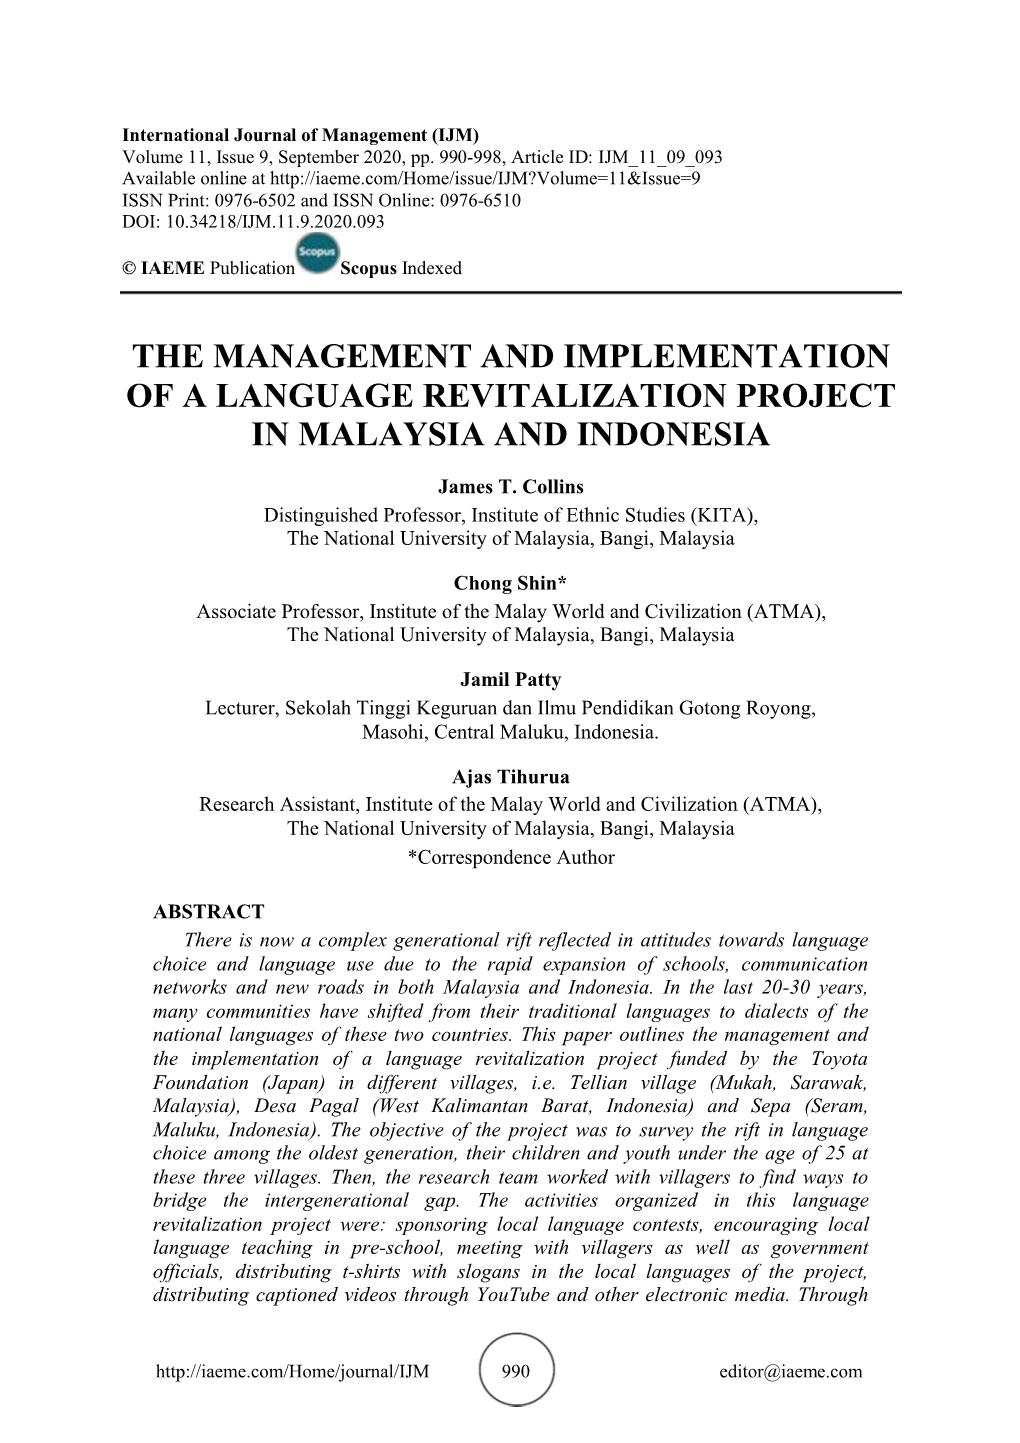 The Management and Implementation of a Language Revitalization Project in Malaysia and Indonesia